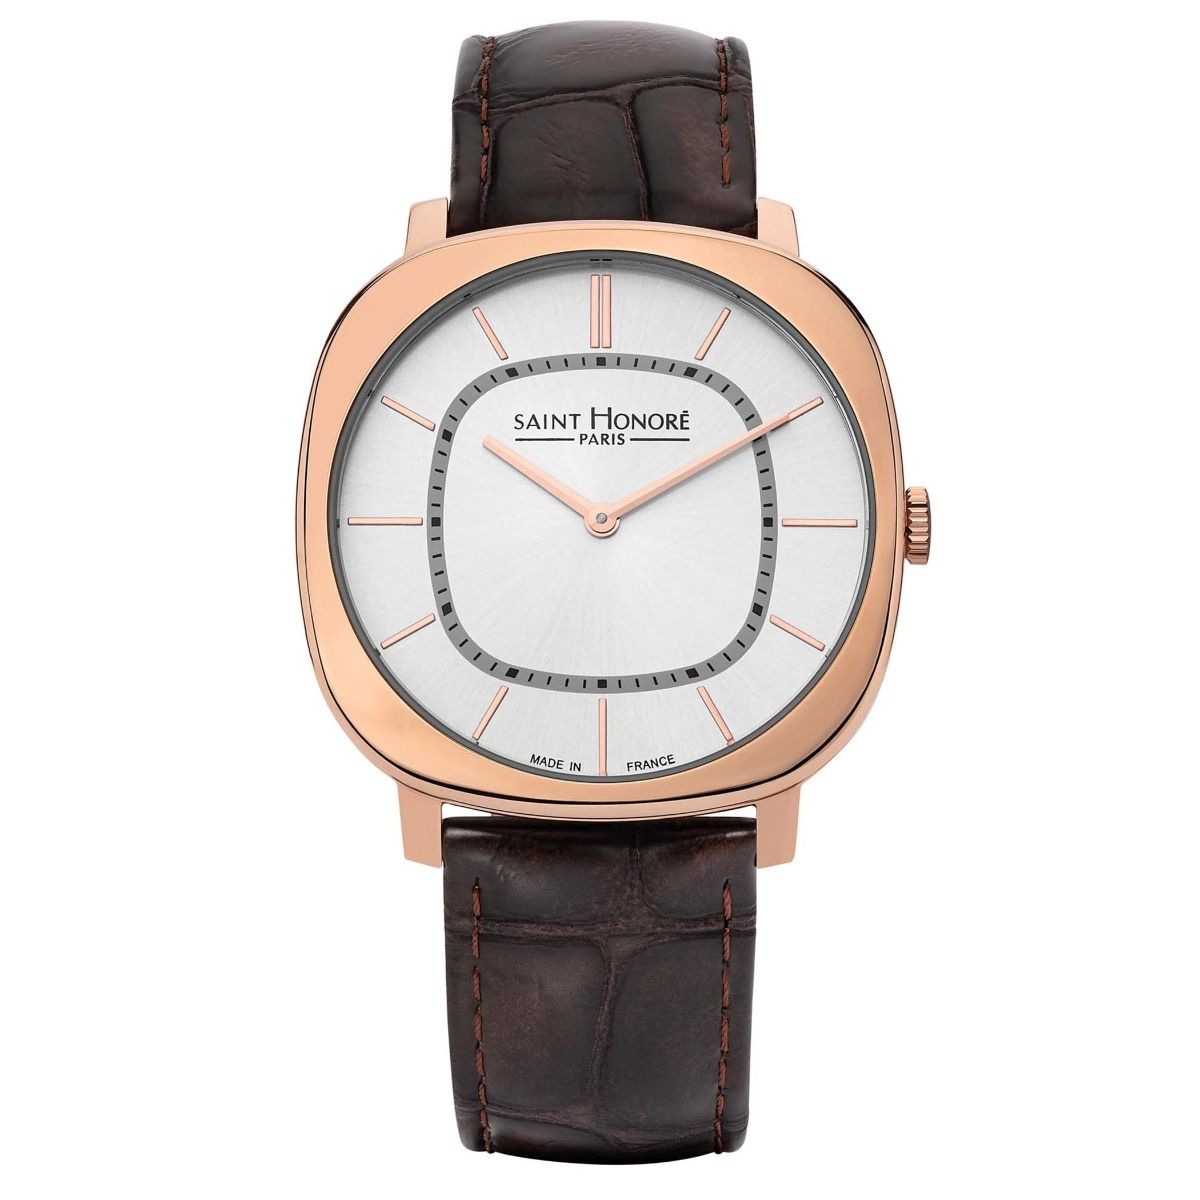 Saint Honore Watches | Groupon Goods